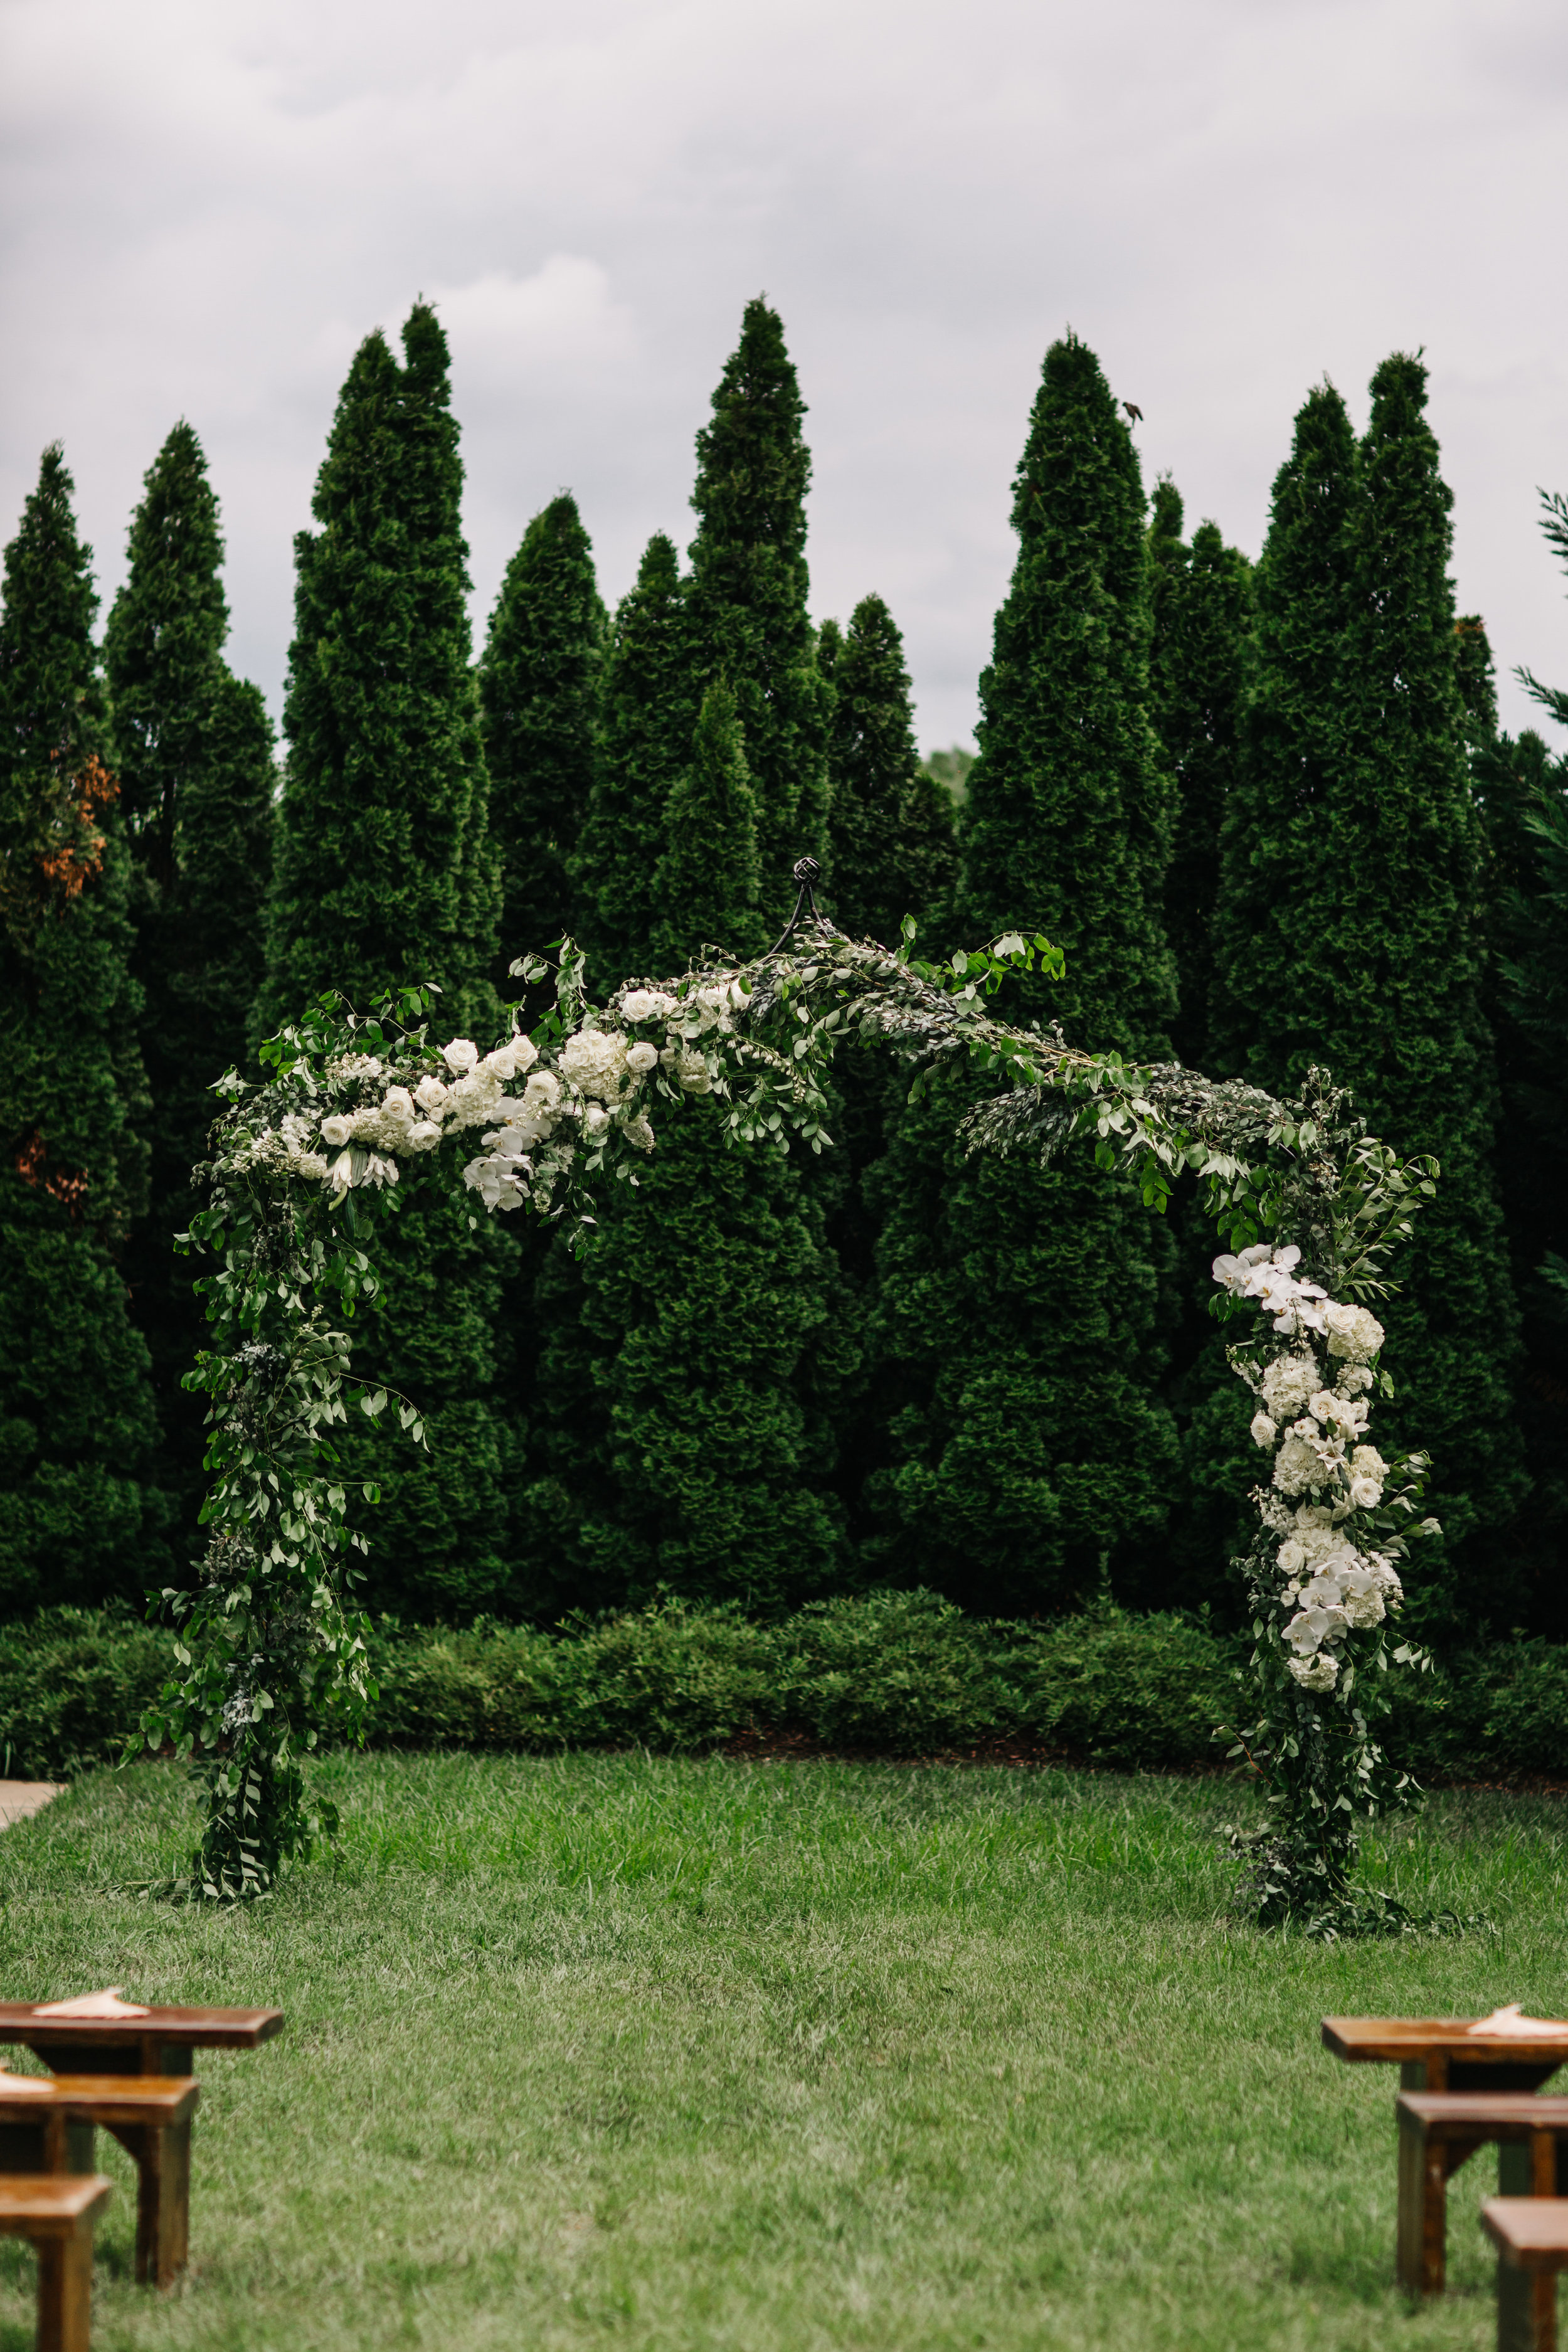 Lush garden arch for the ceremony backdrop with all white orchids, garden roses, and ranunculus. Southeastern US floral design for weddings.